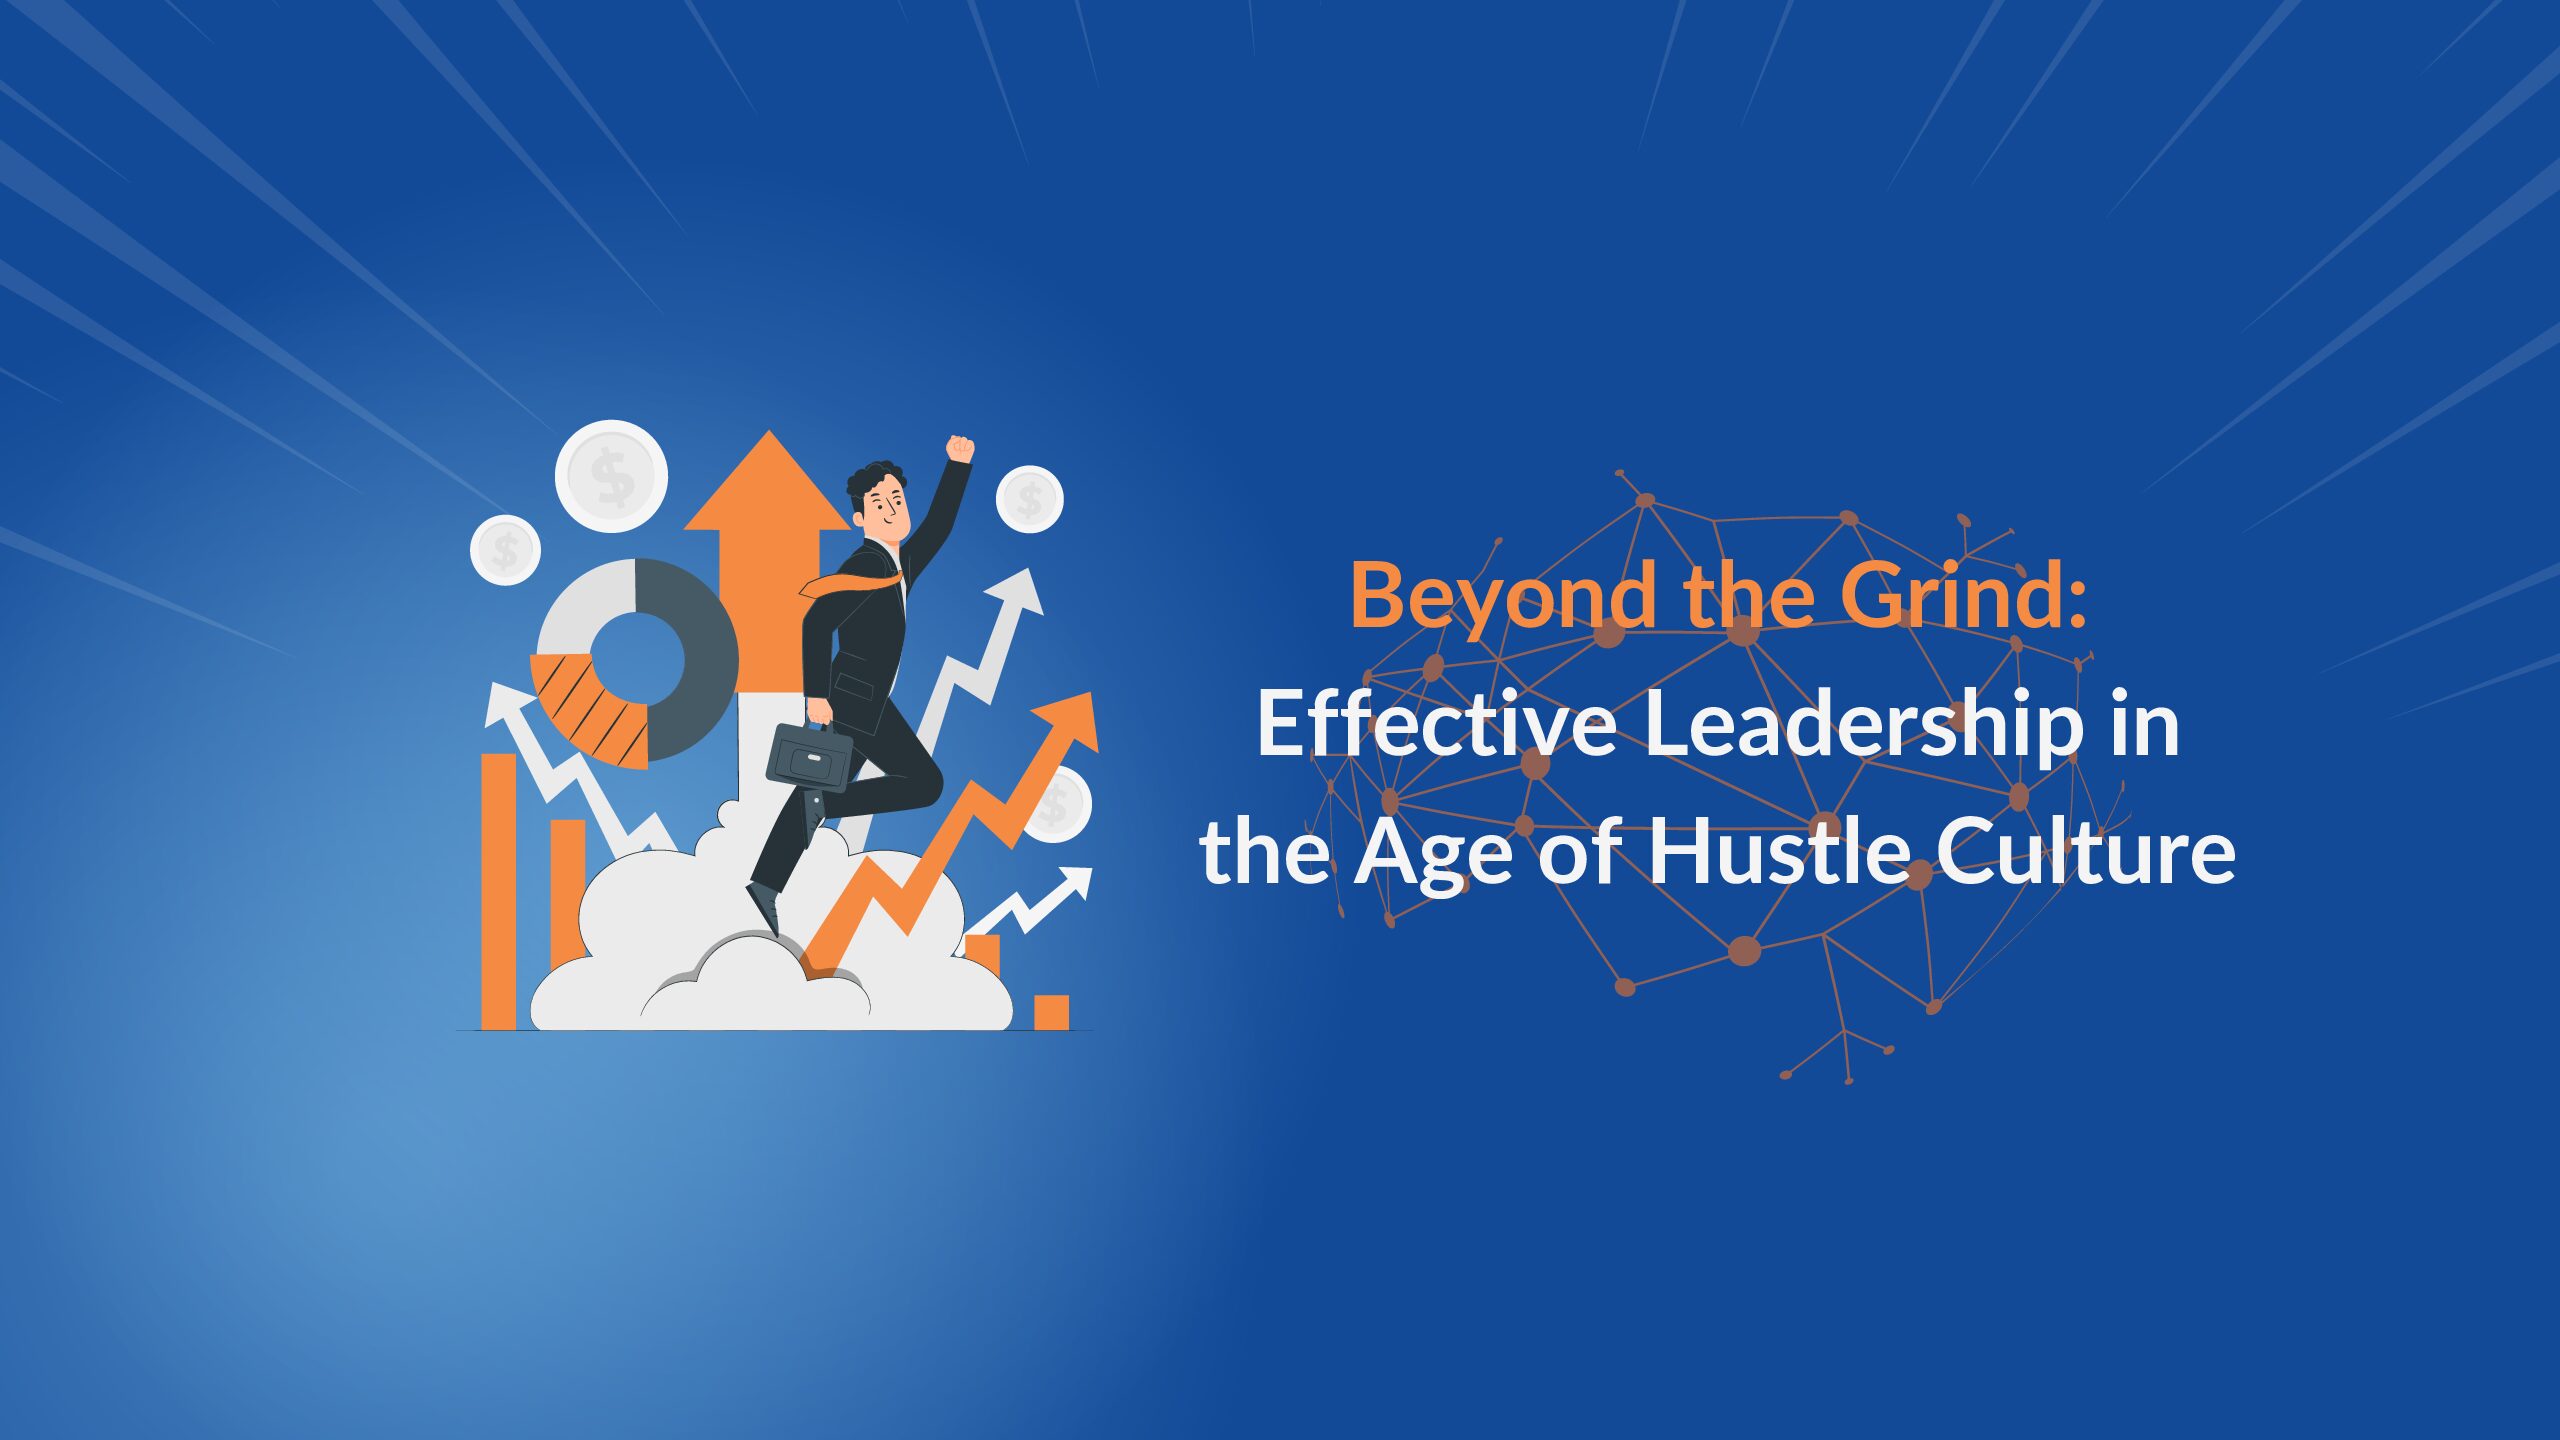 Beyond the Grind: Effective Leadership in the Age of Hustle Culture